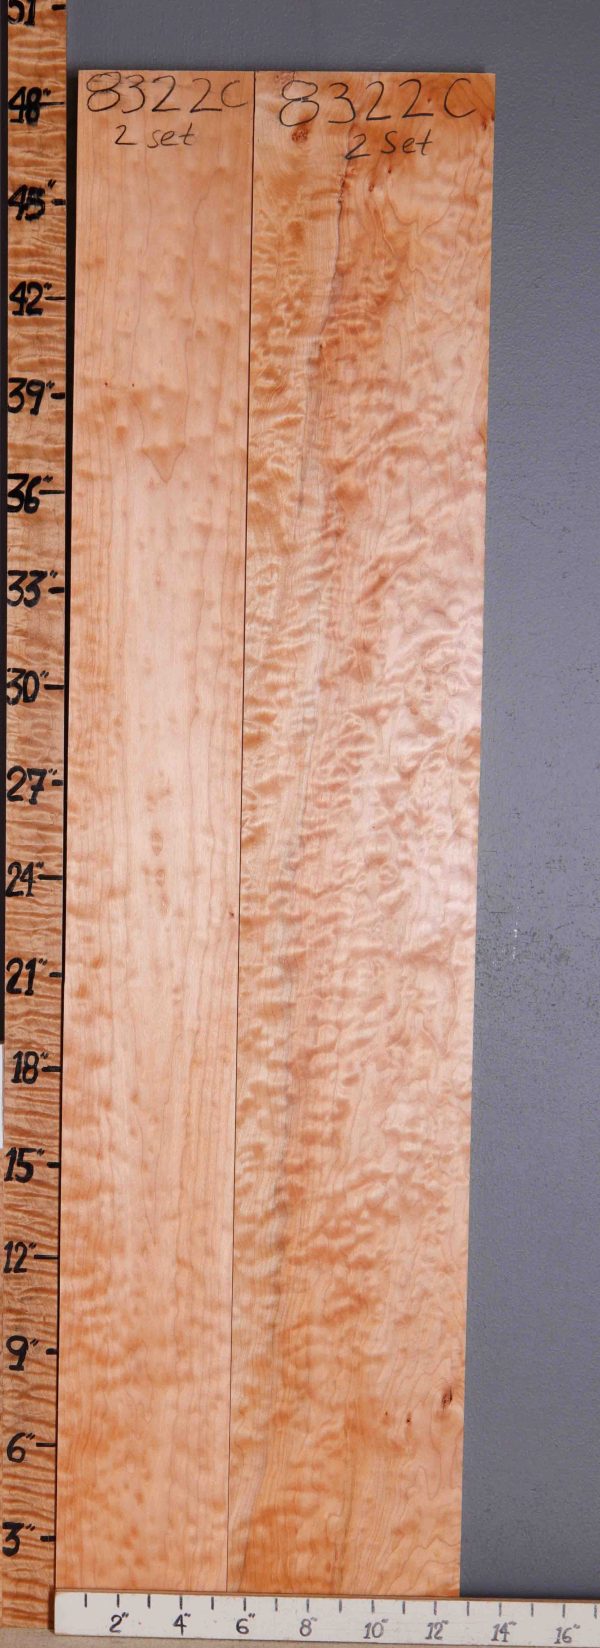 5A Quilted Maple 2 Board Set Lumber 12"3/4 X 48" X 4/4 (NWT-8322C)